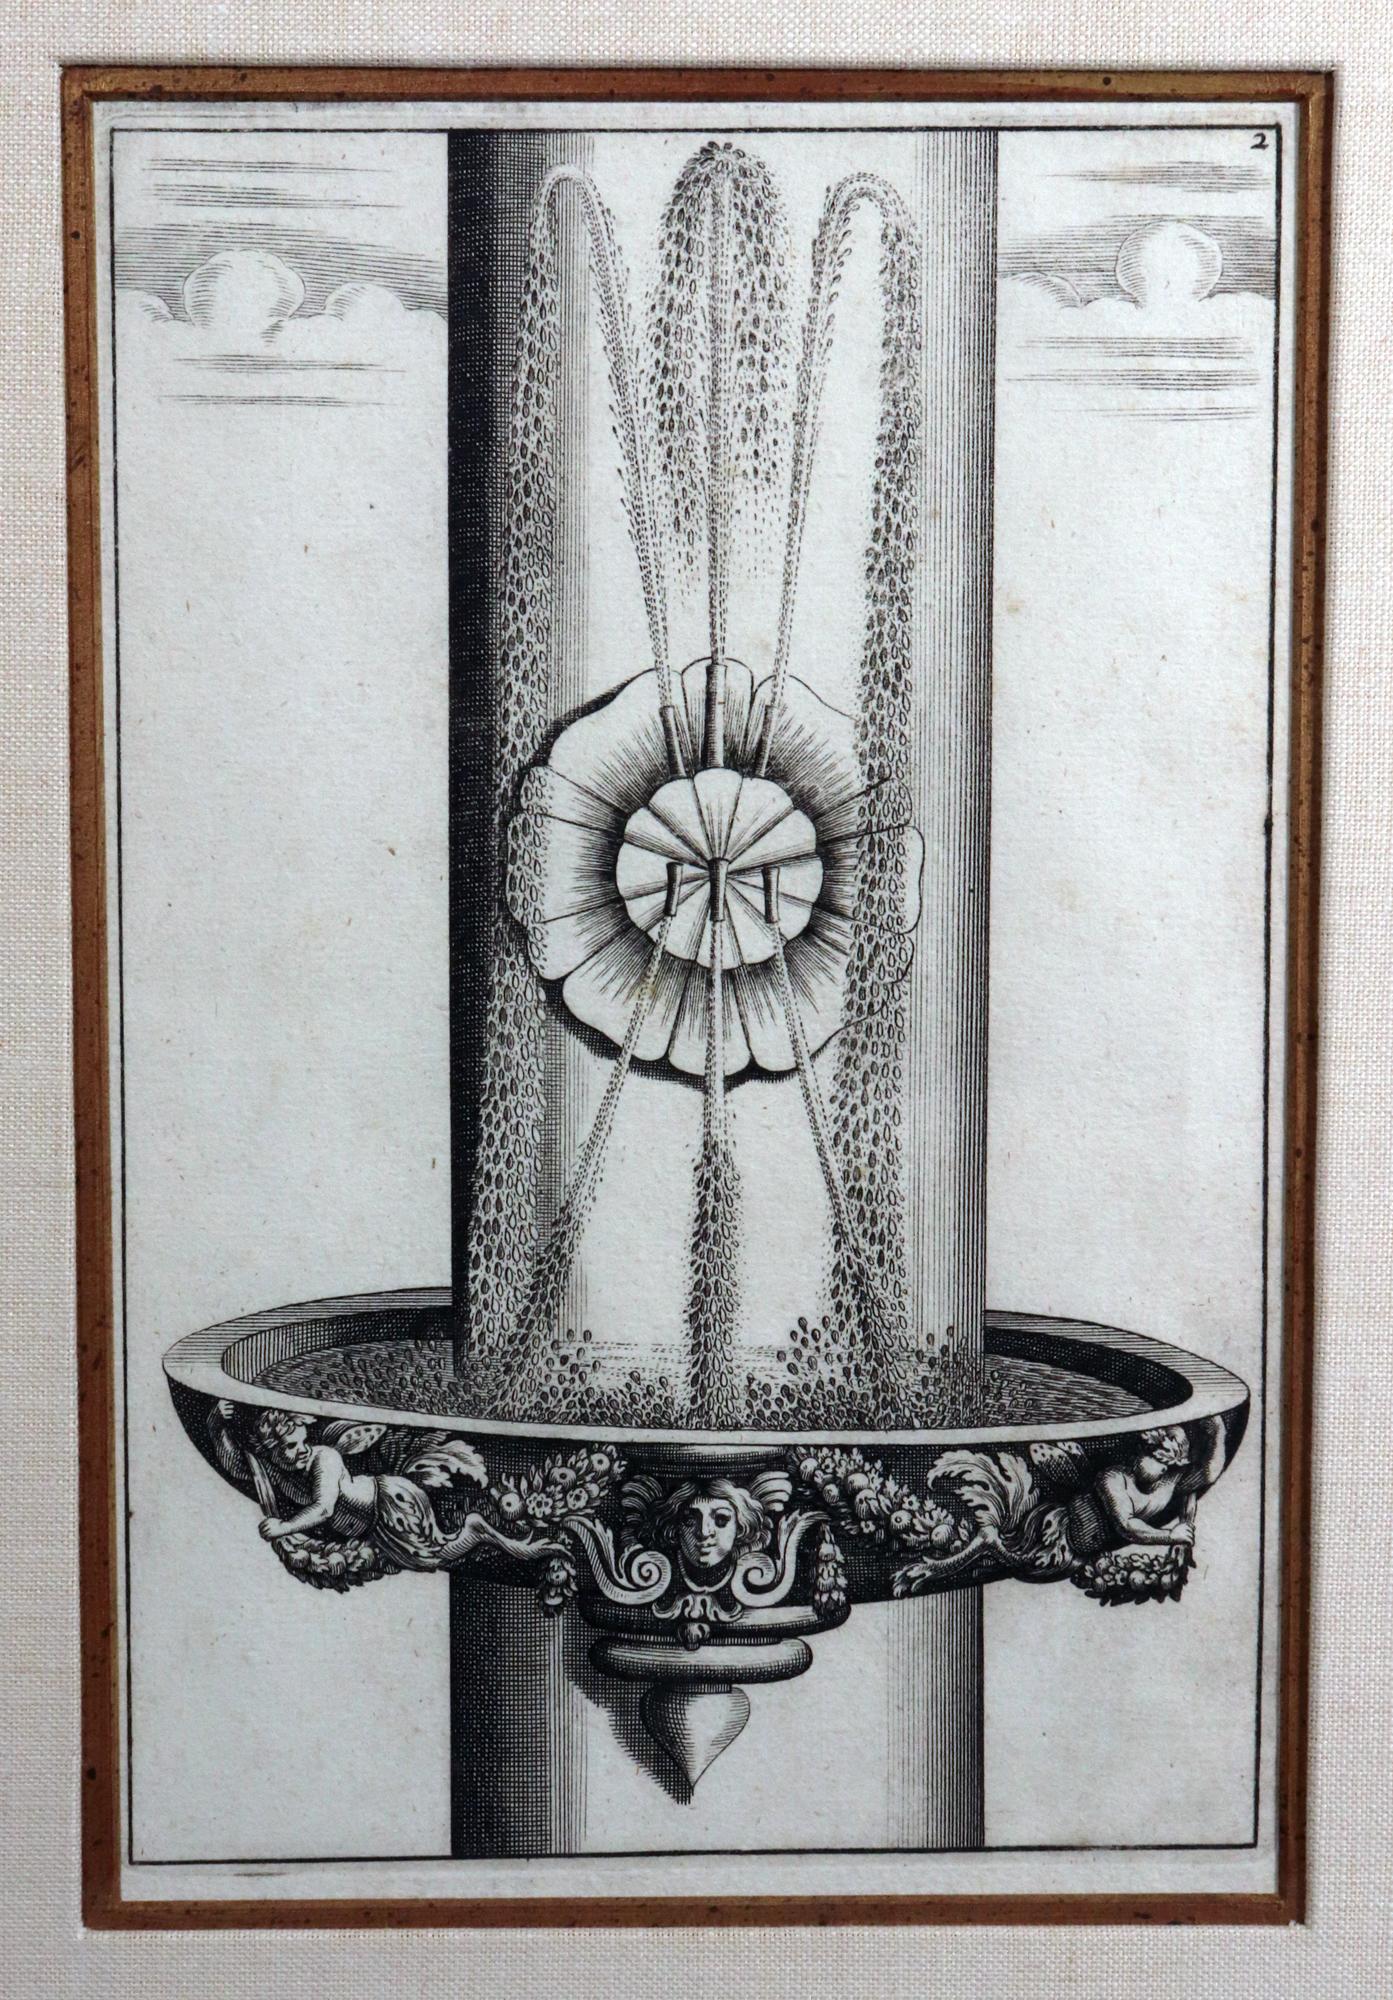 Georg Andreas Bockler’s Engravings of Architectural Fountains for Formal Gardens For Sale 4